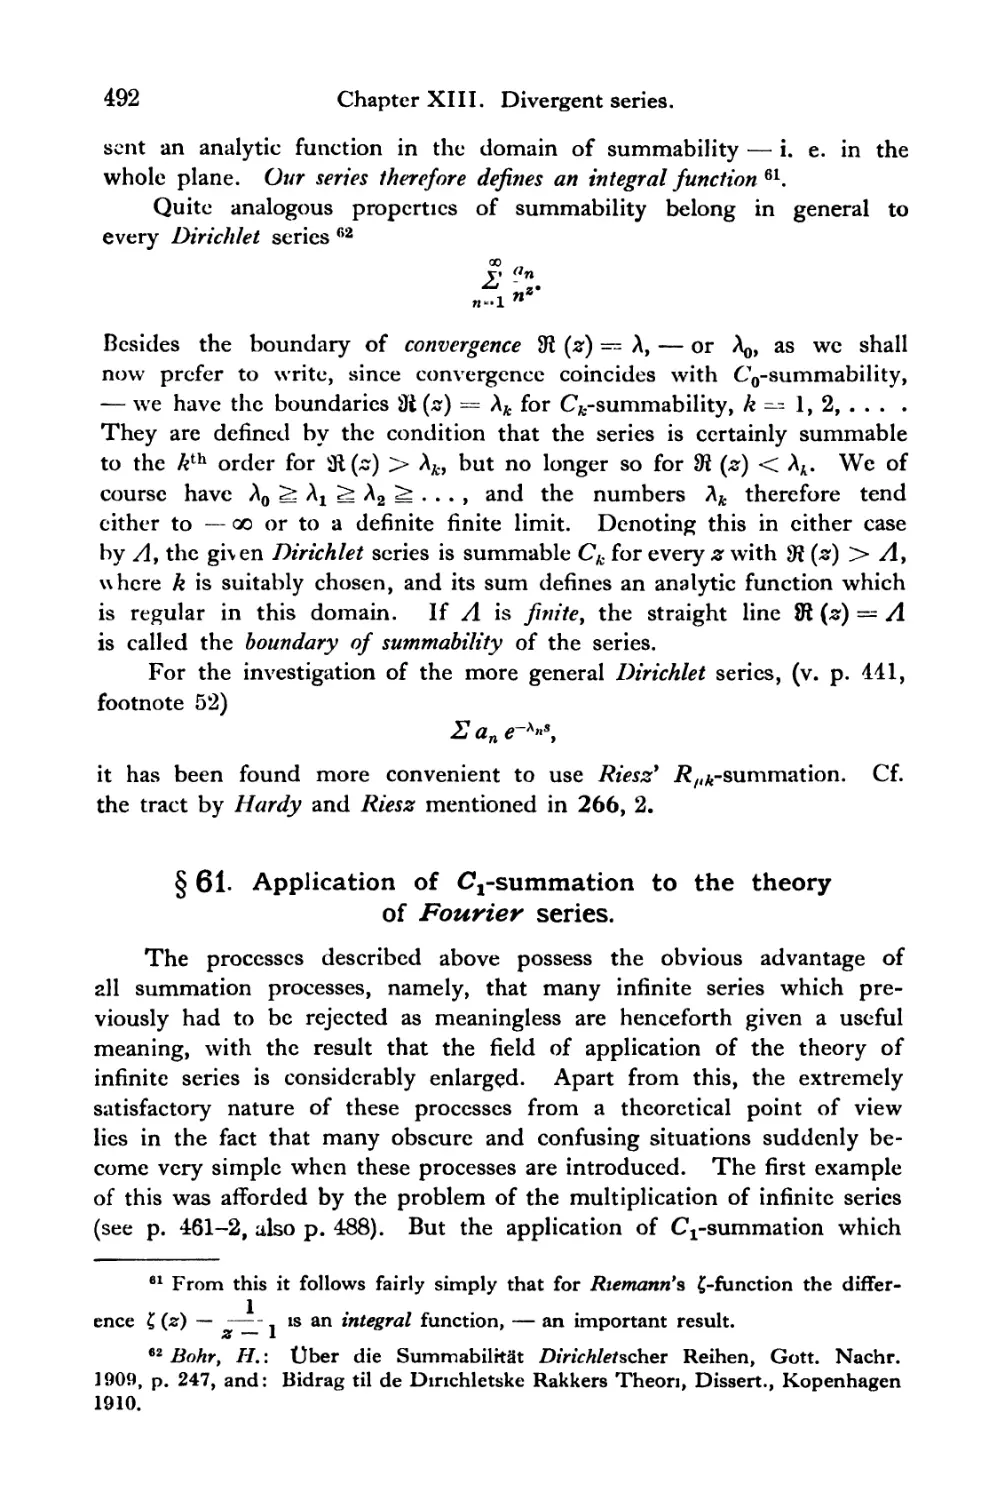 § 61. Application of $C_1$- summation to the theory of Fourier series